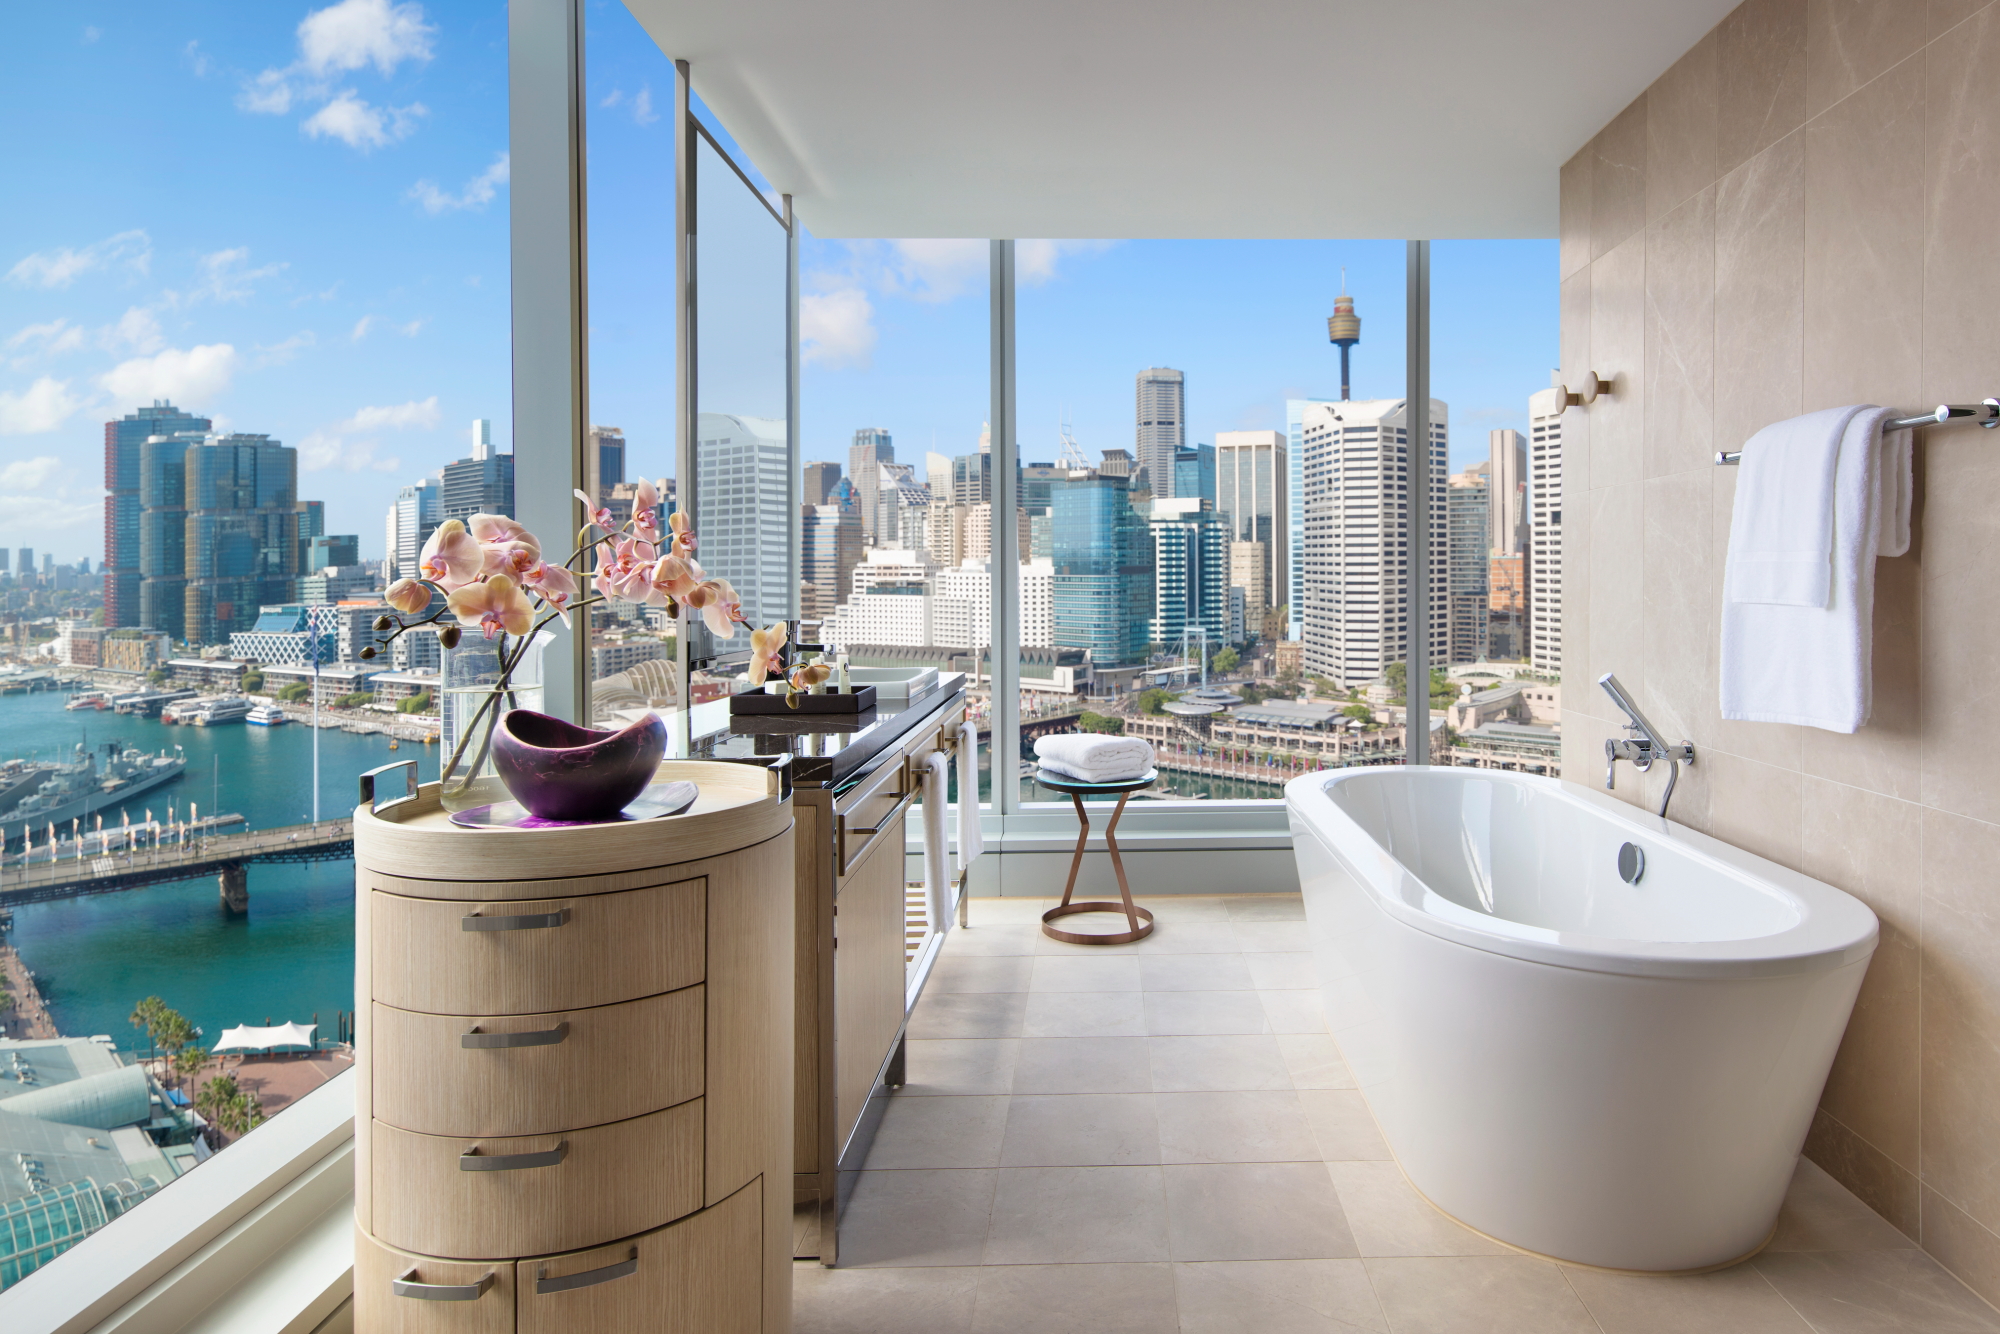 One of the world's coolest hotel bathrooms can be found at the Sofitel Sydney Darling Harbour. The luxury hotel is part of Accor. Click to enlarge.